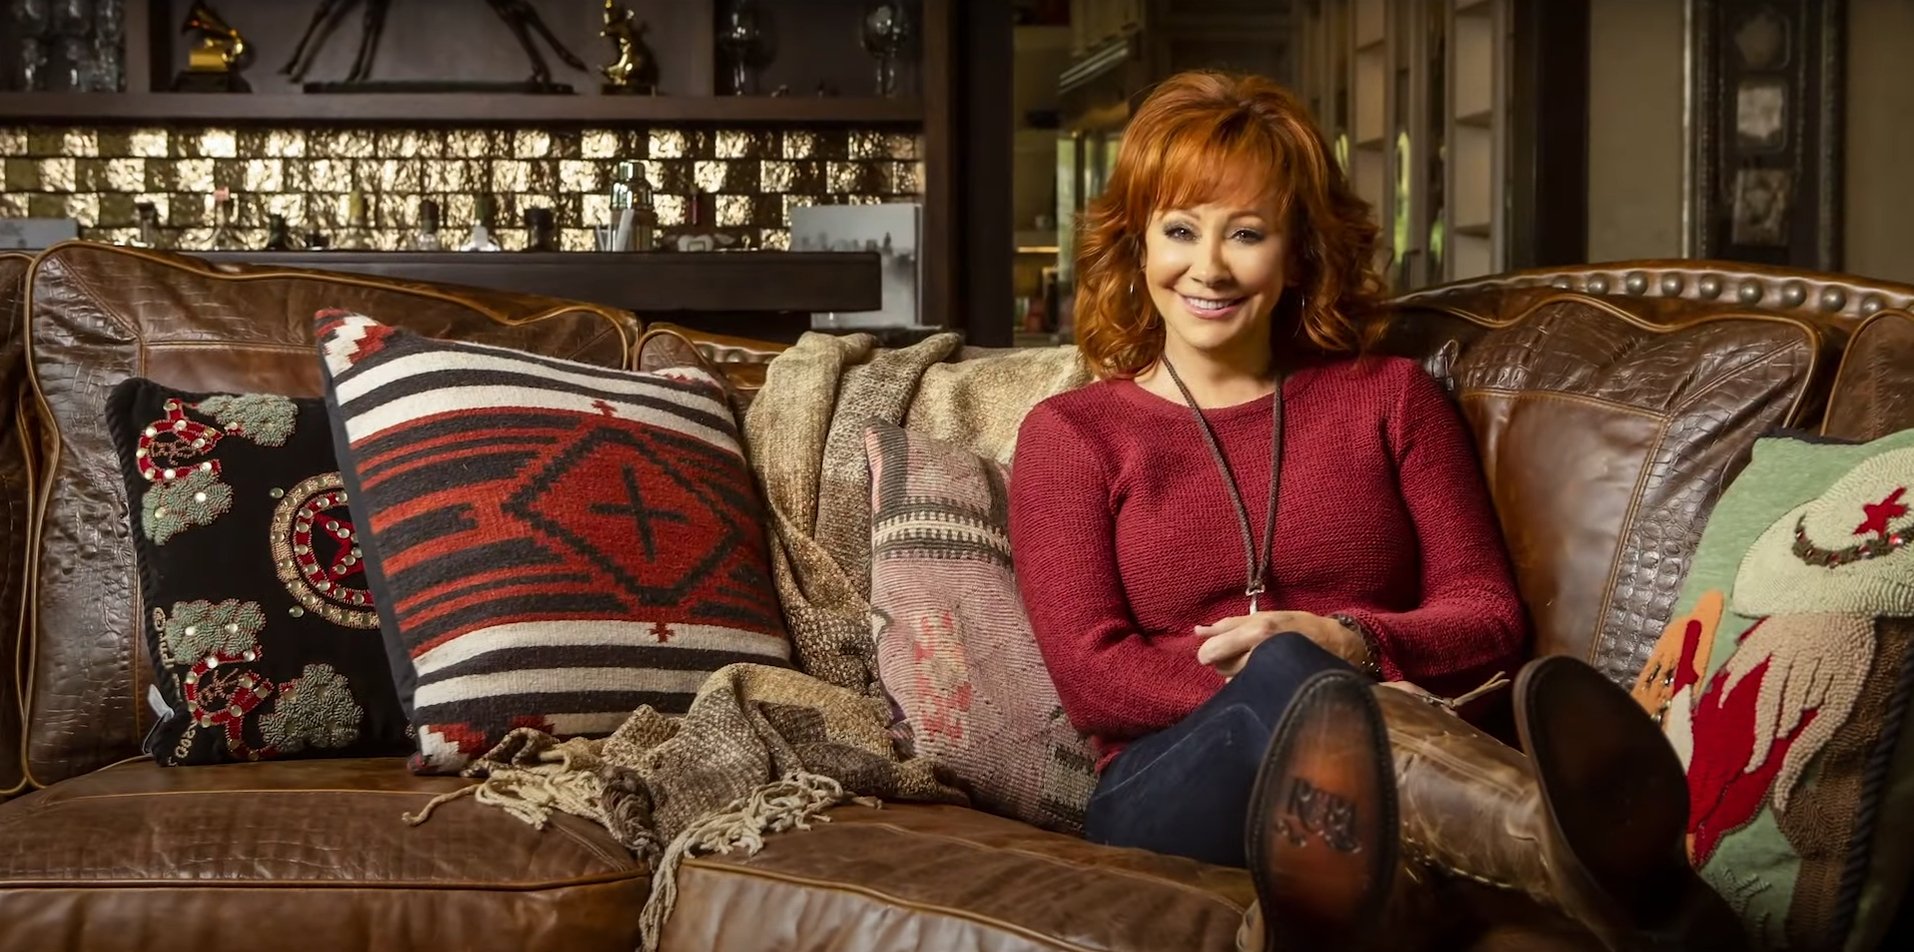 Reba McEntire in her Nashville mansion, from a video dated November 20, 2020 | Source: YouTube/RebaMcEntire